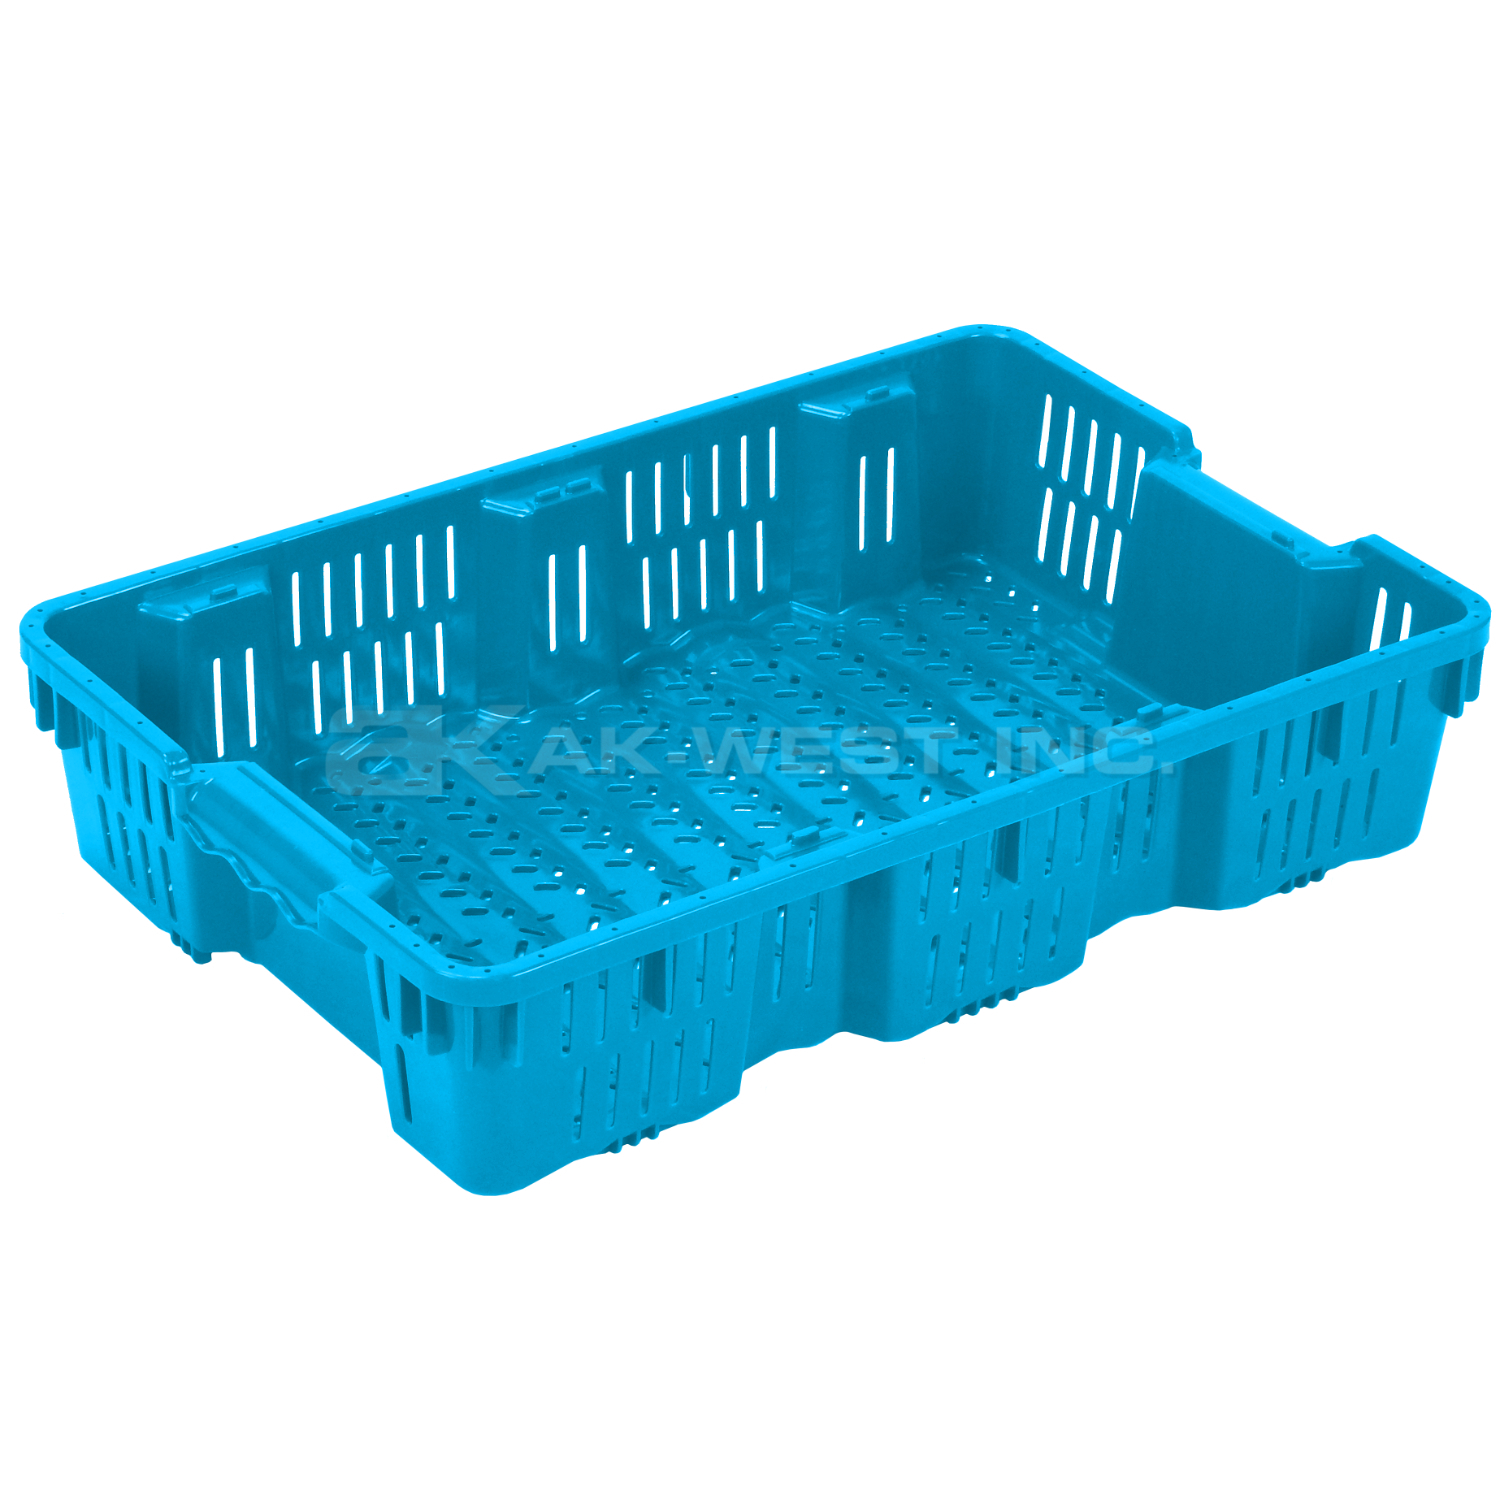 Lt. Blue, 24"L x 16"W x 5"H Wavy Stack and Nest Container w/ Vented Sides and Base